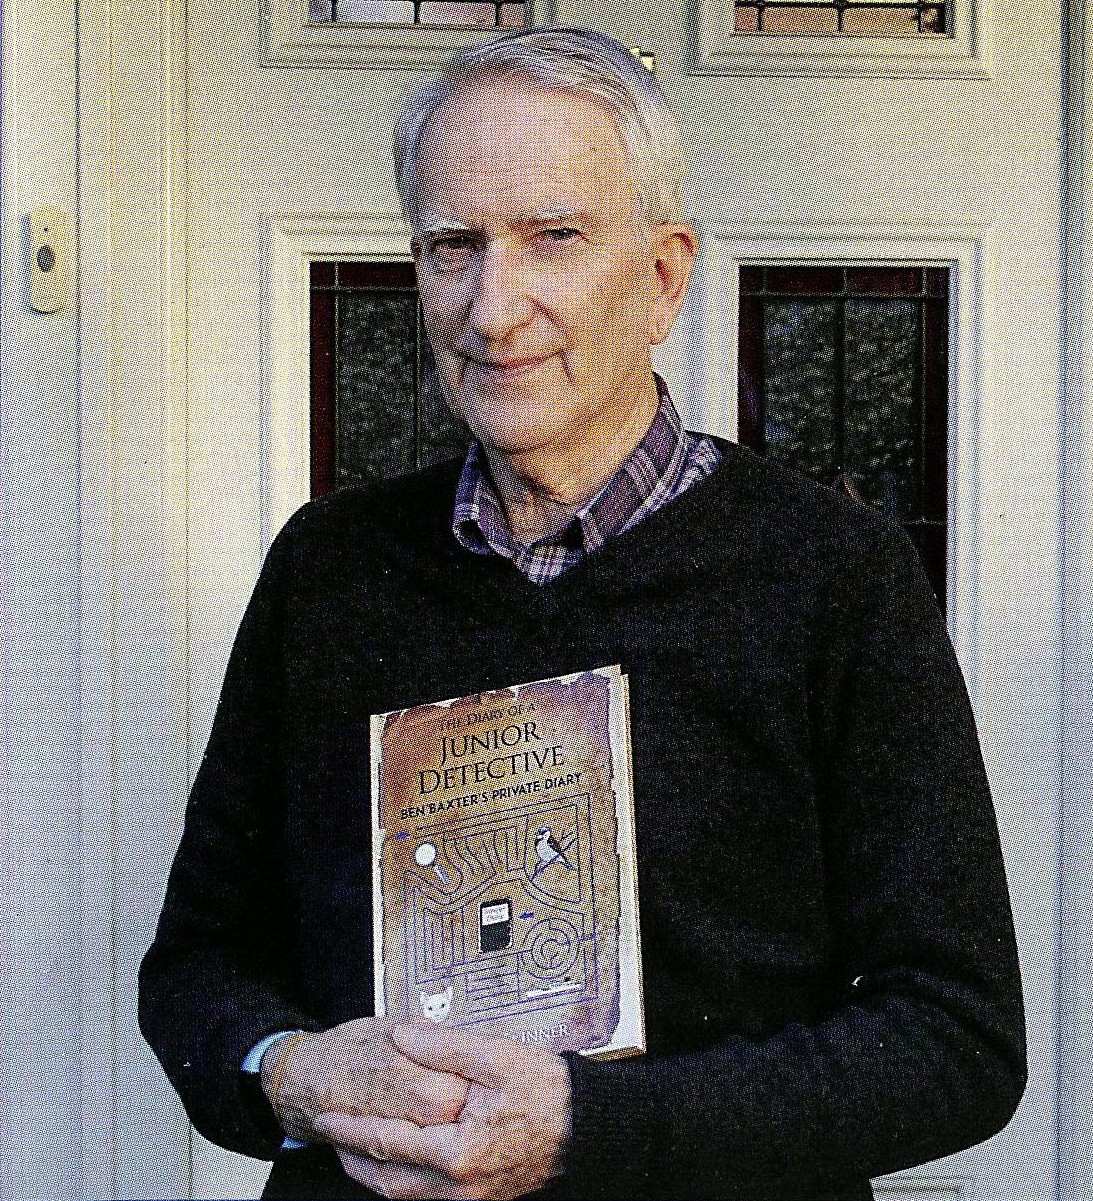 Old Elthamians News Featured article about Richard Skinner’s ‘The Diary of a Junior Detective’